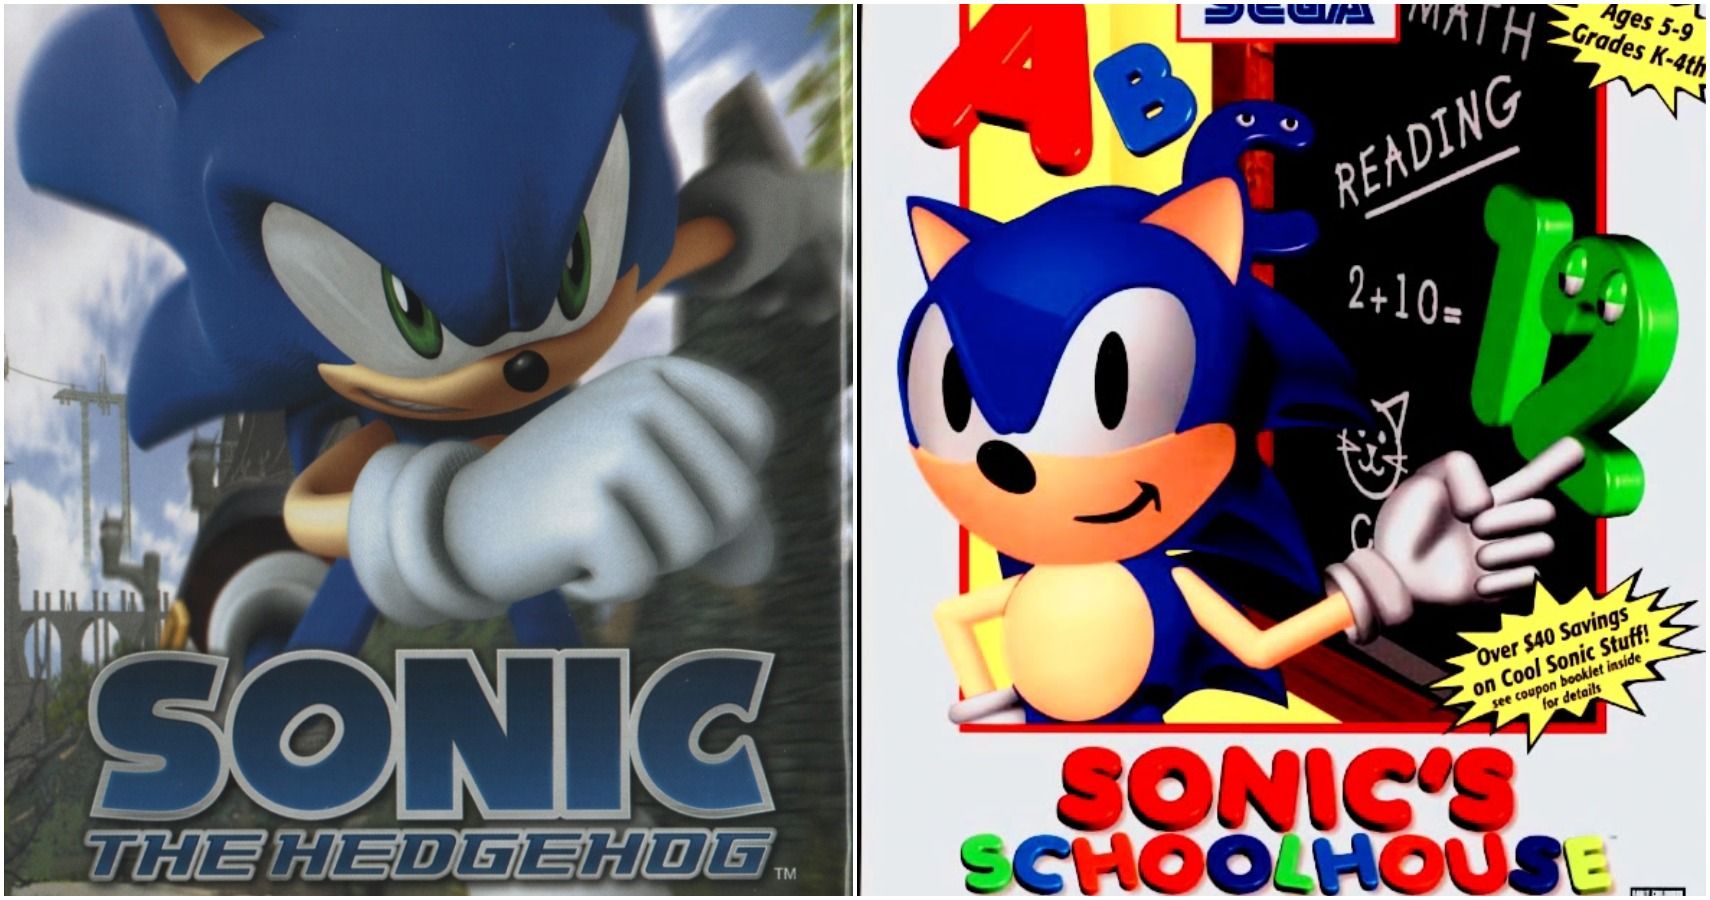  Sonic the Hedgehog : Unknown: Video Games